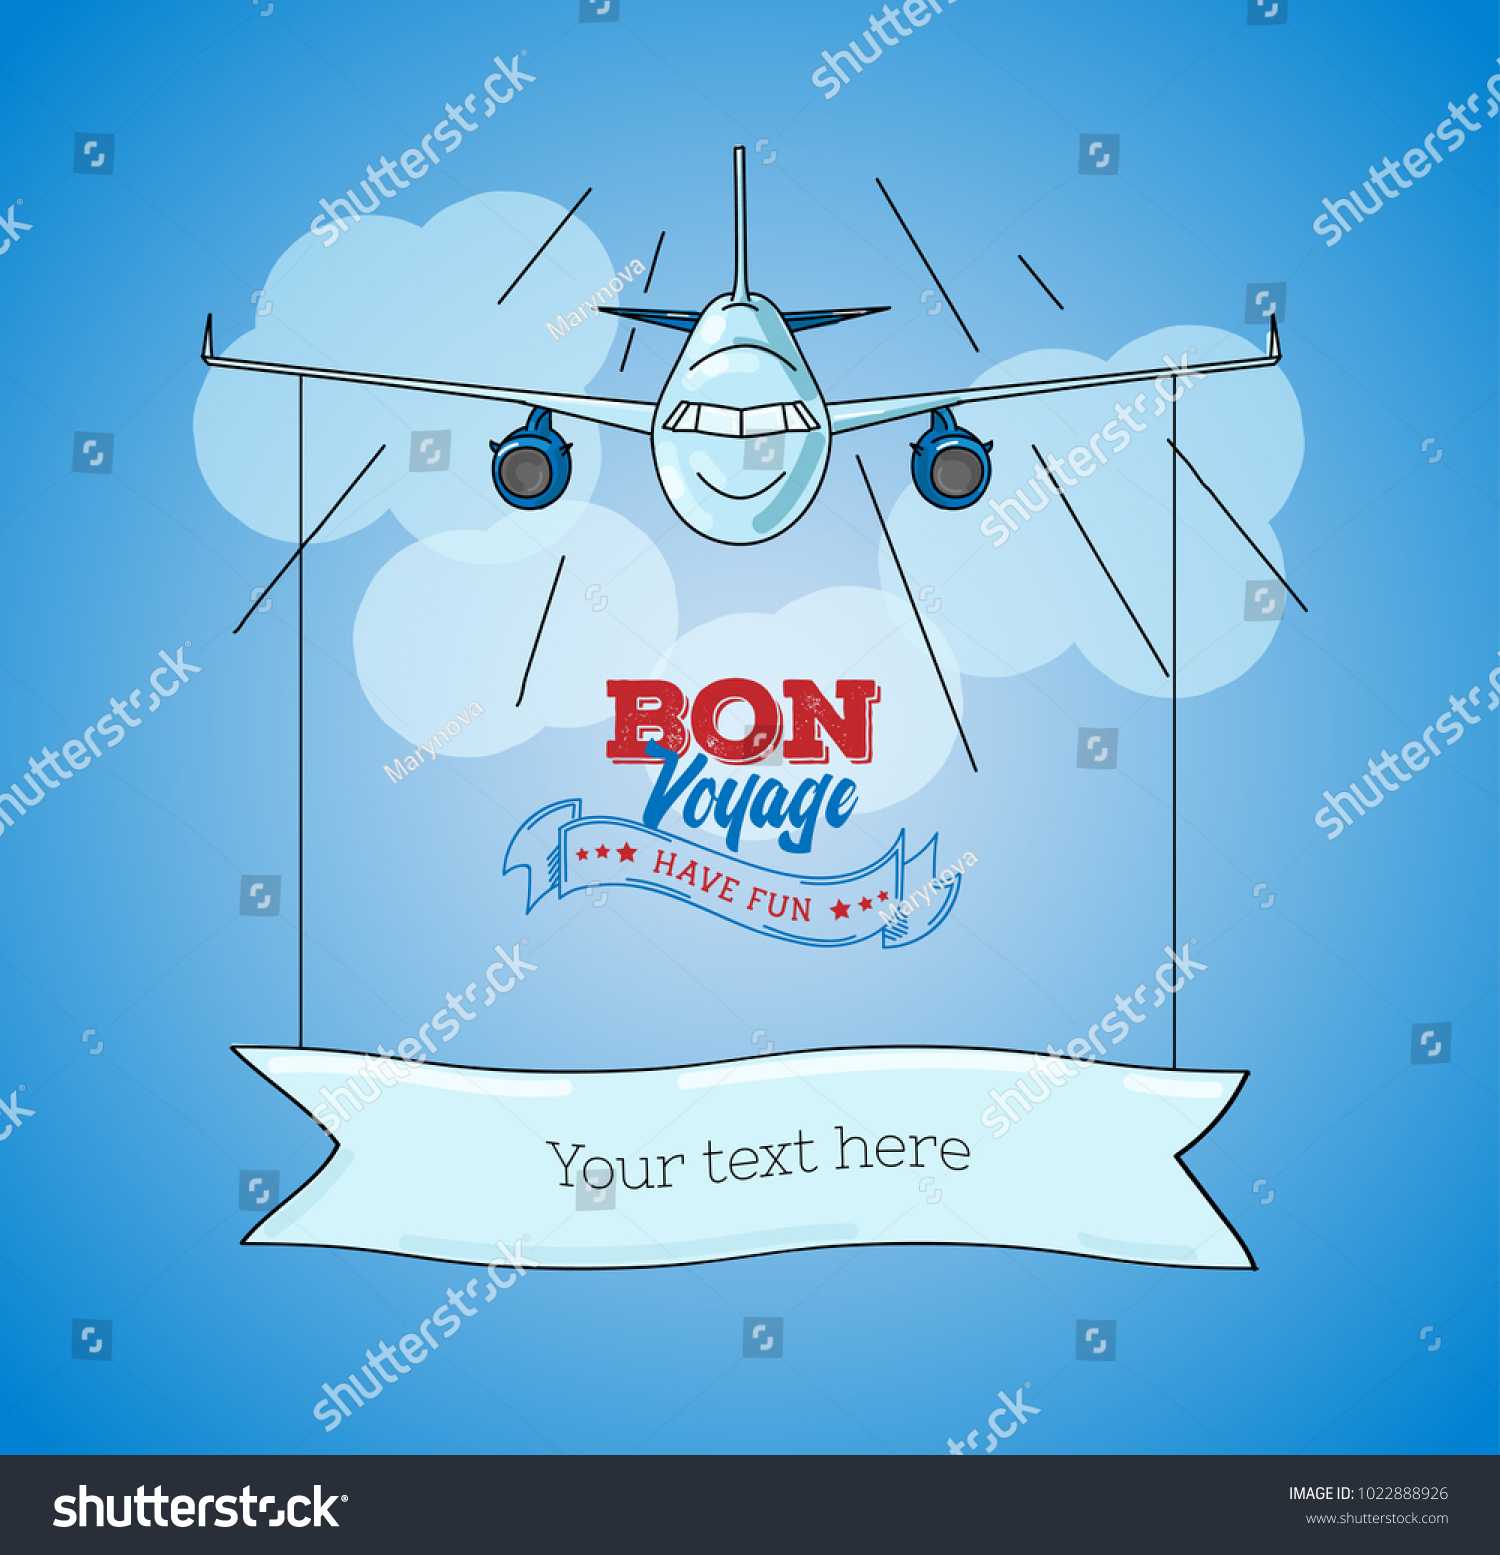 Card Template Plane Graphic Illustration On Stock Vector Throughout Bon Voyage Card Template